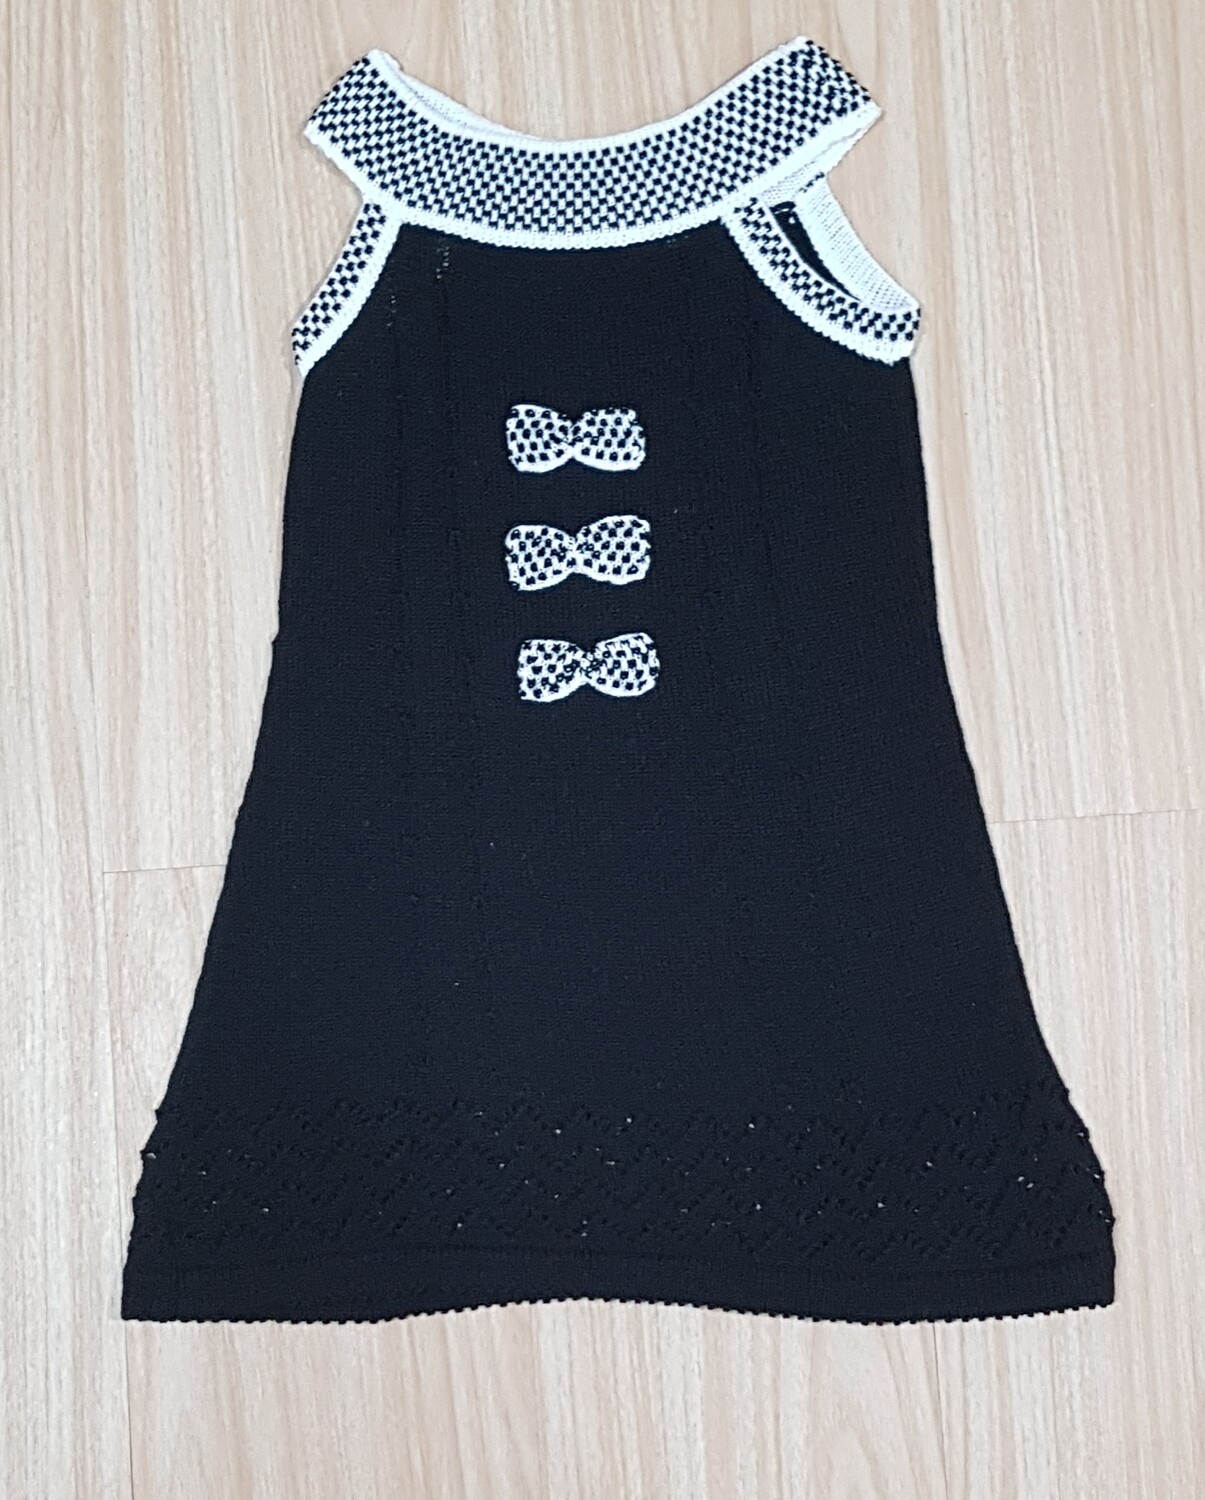 Dress with Bows (Black)